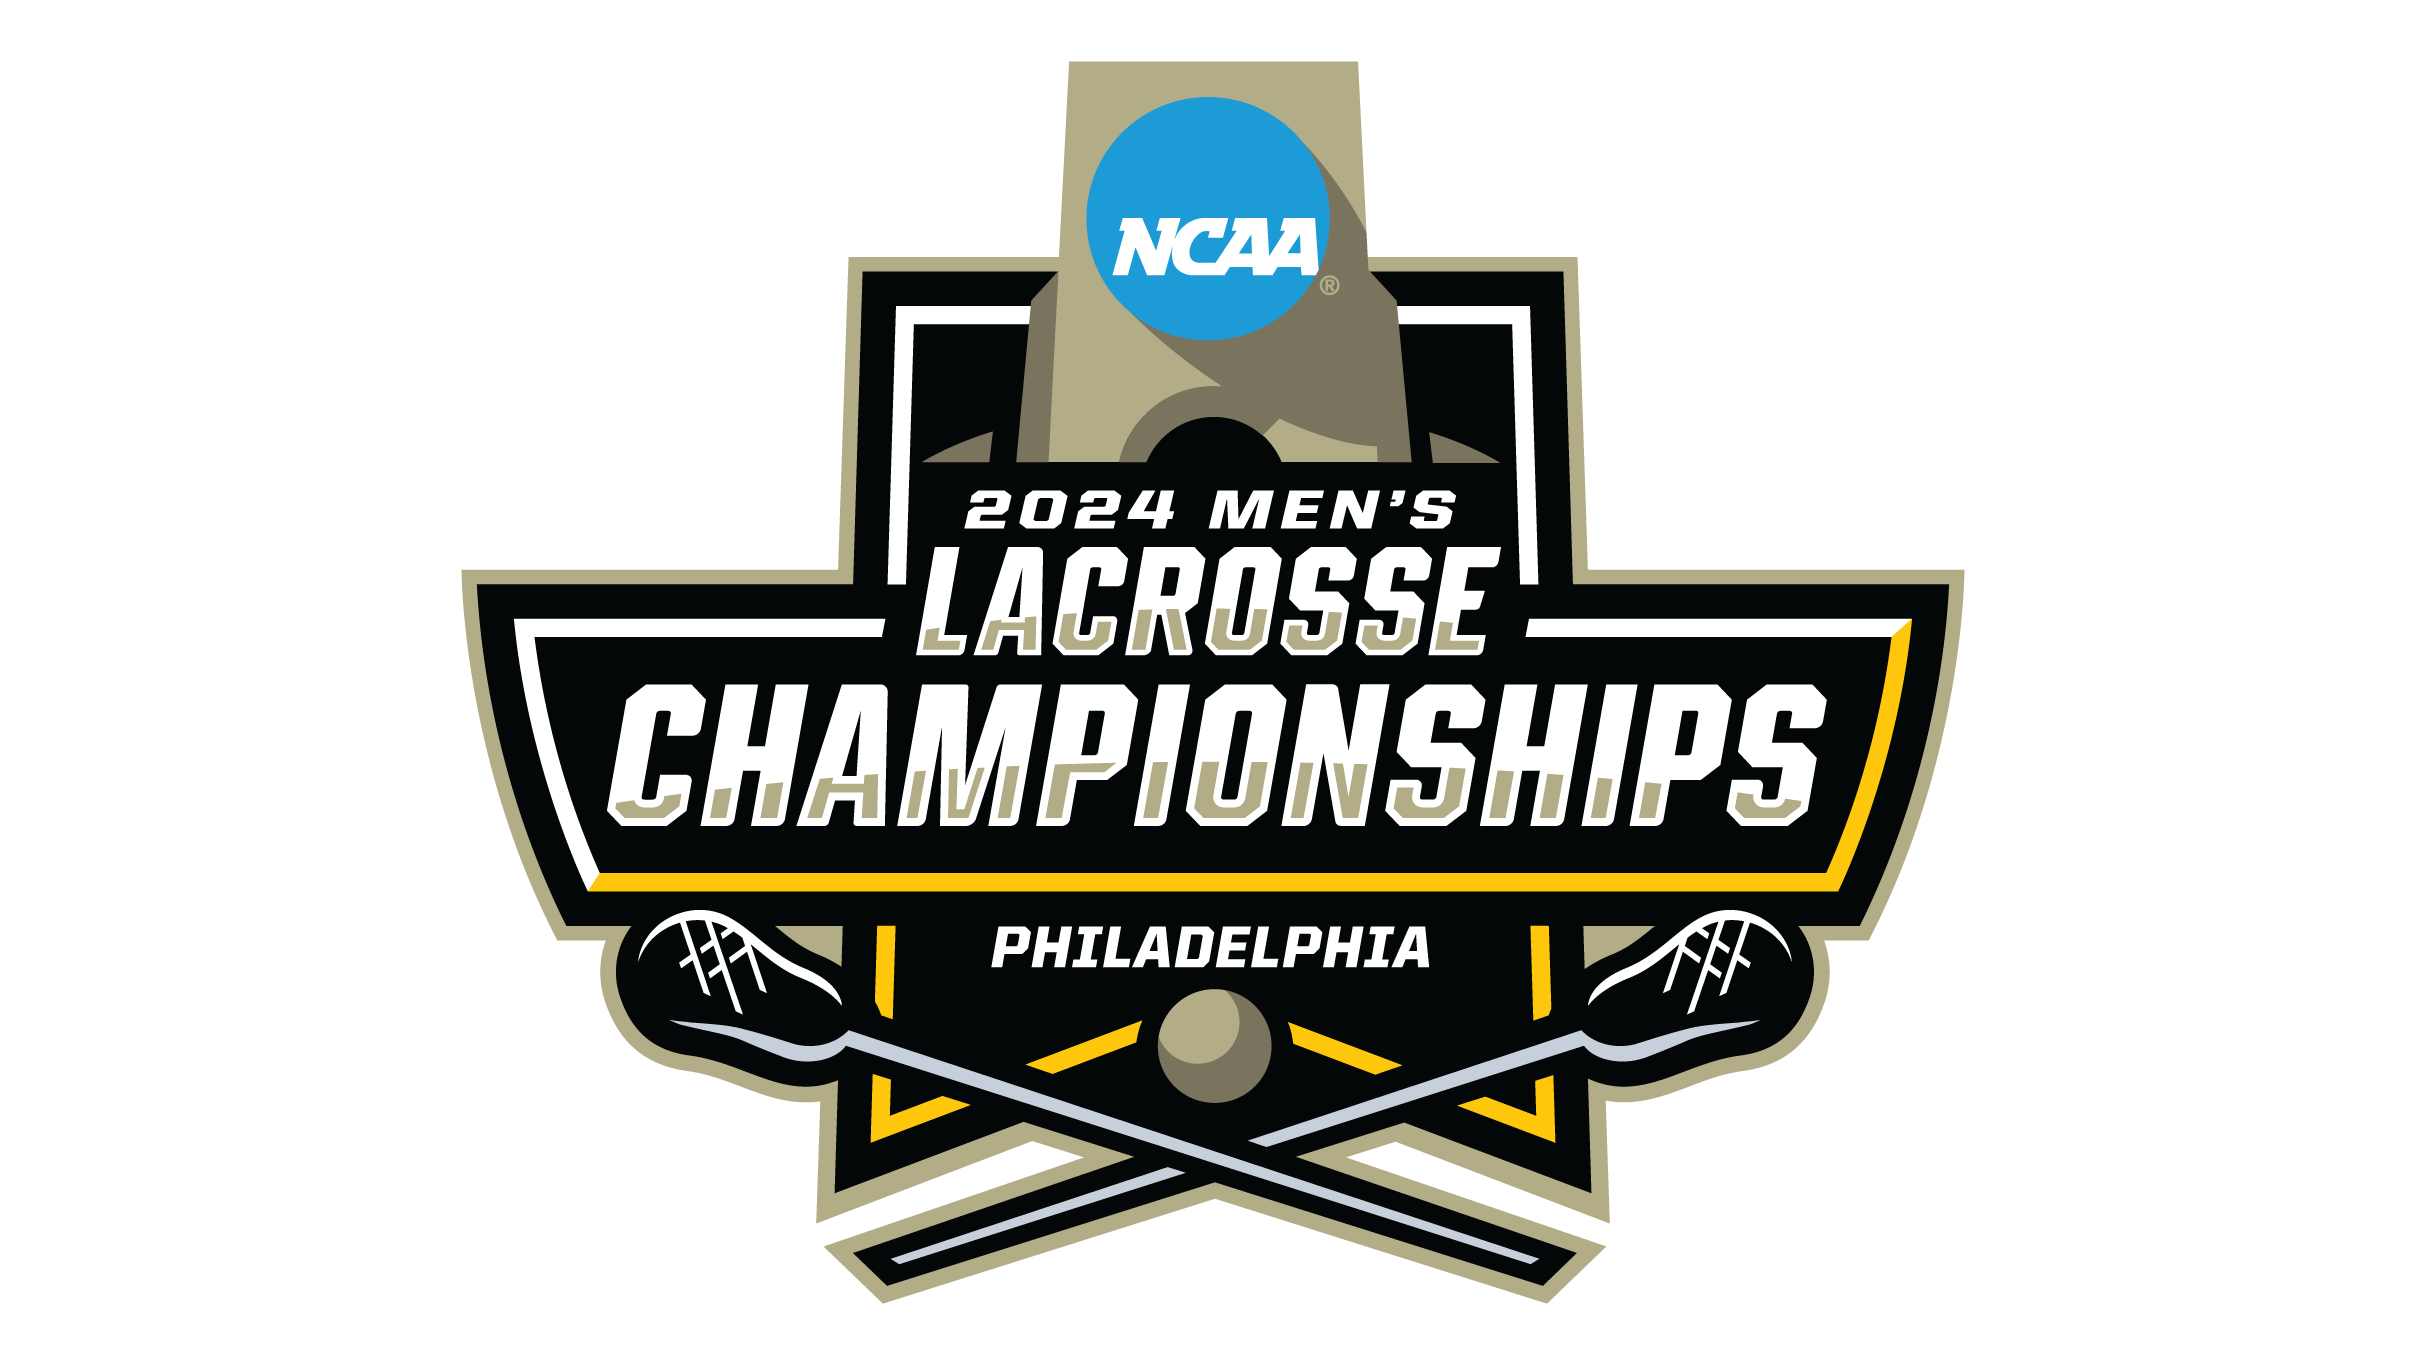 accurate presale code to NCAA Mens Lacrosse affordable tickets in Philadelphia